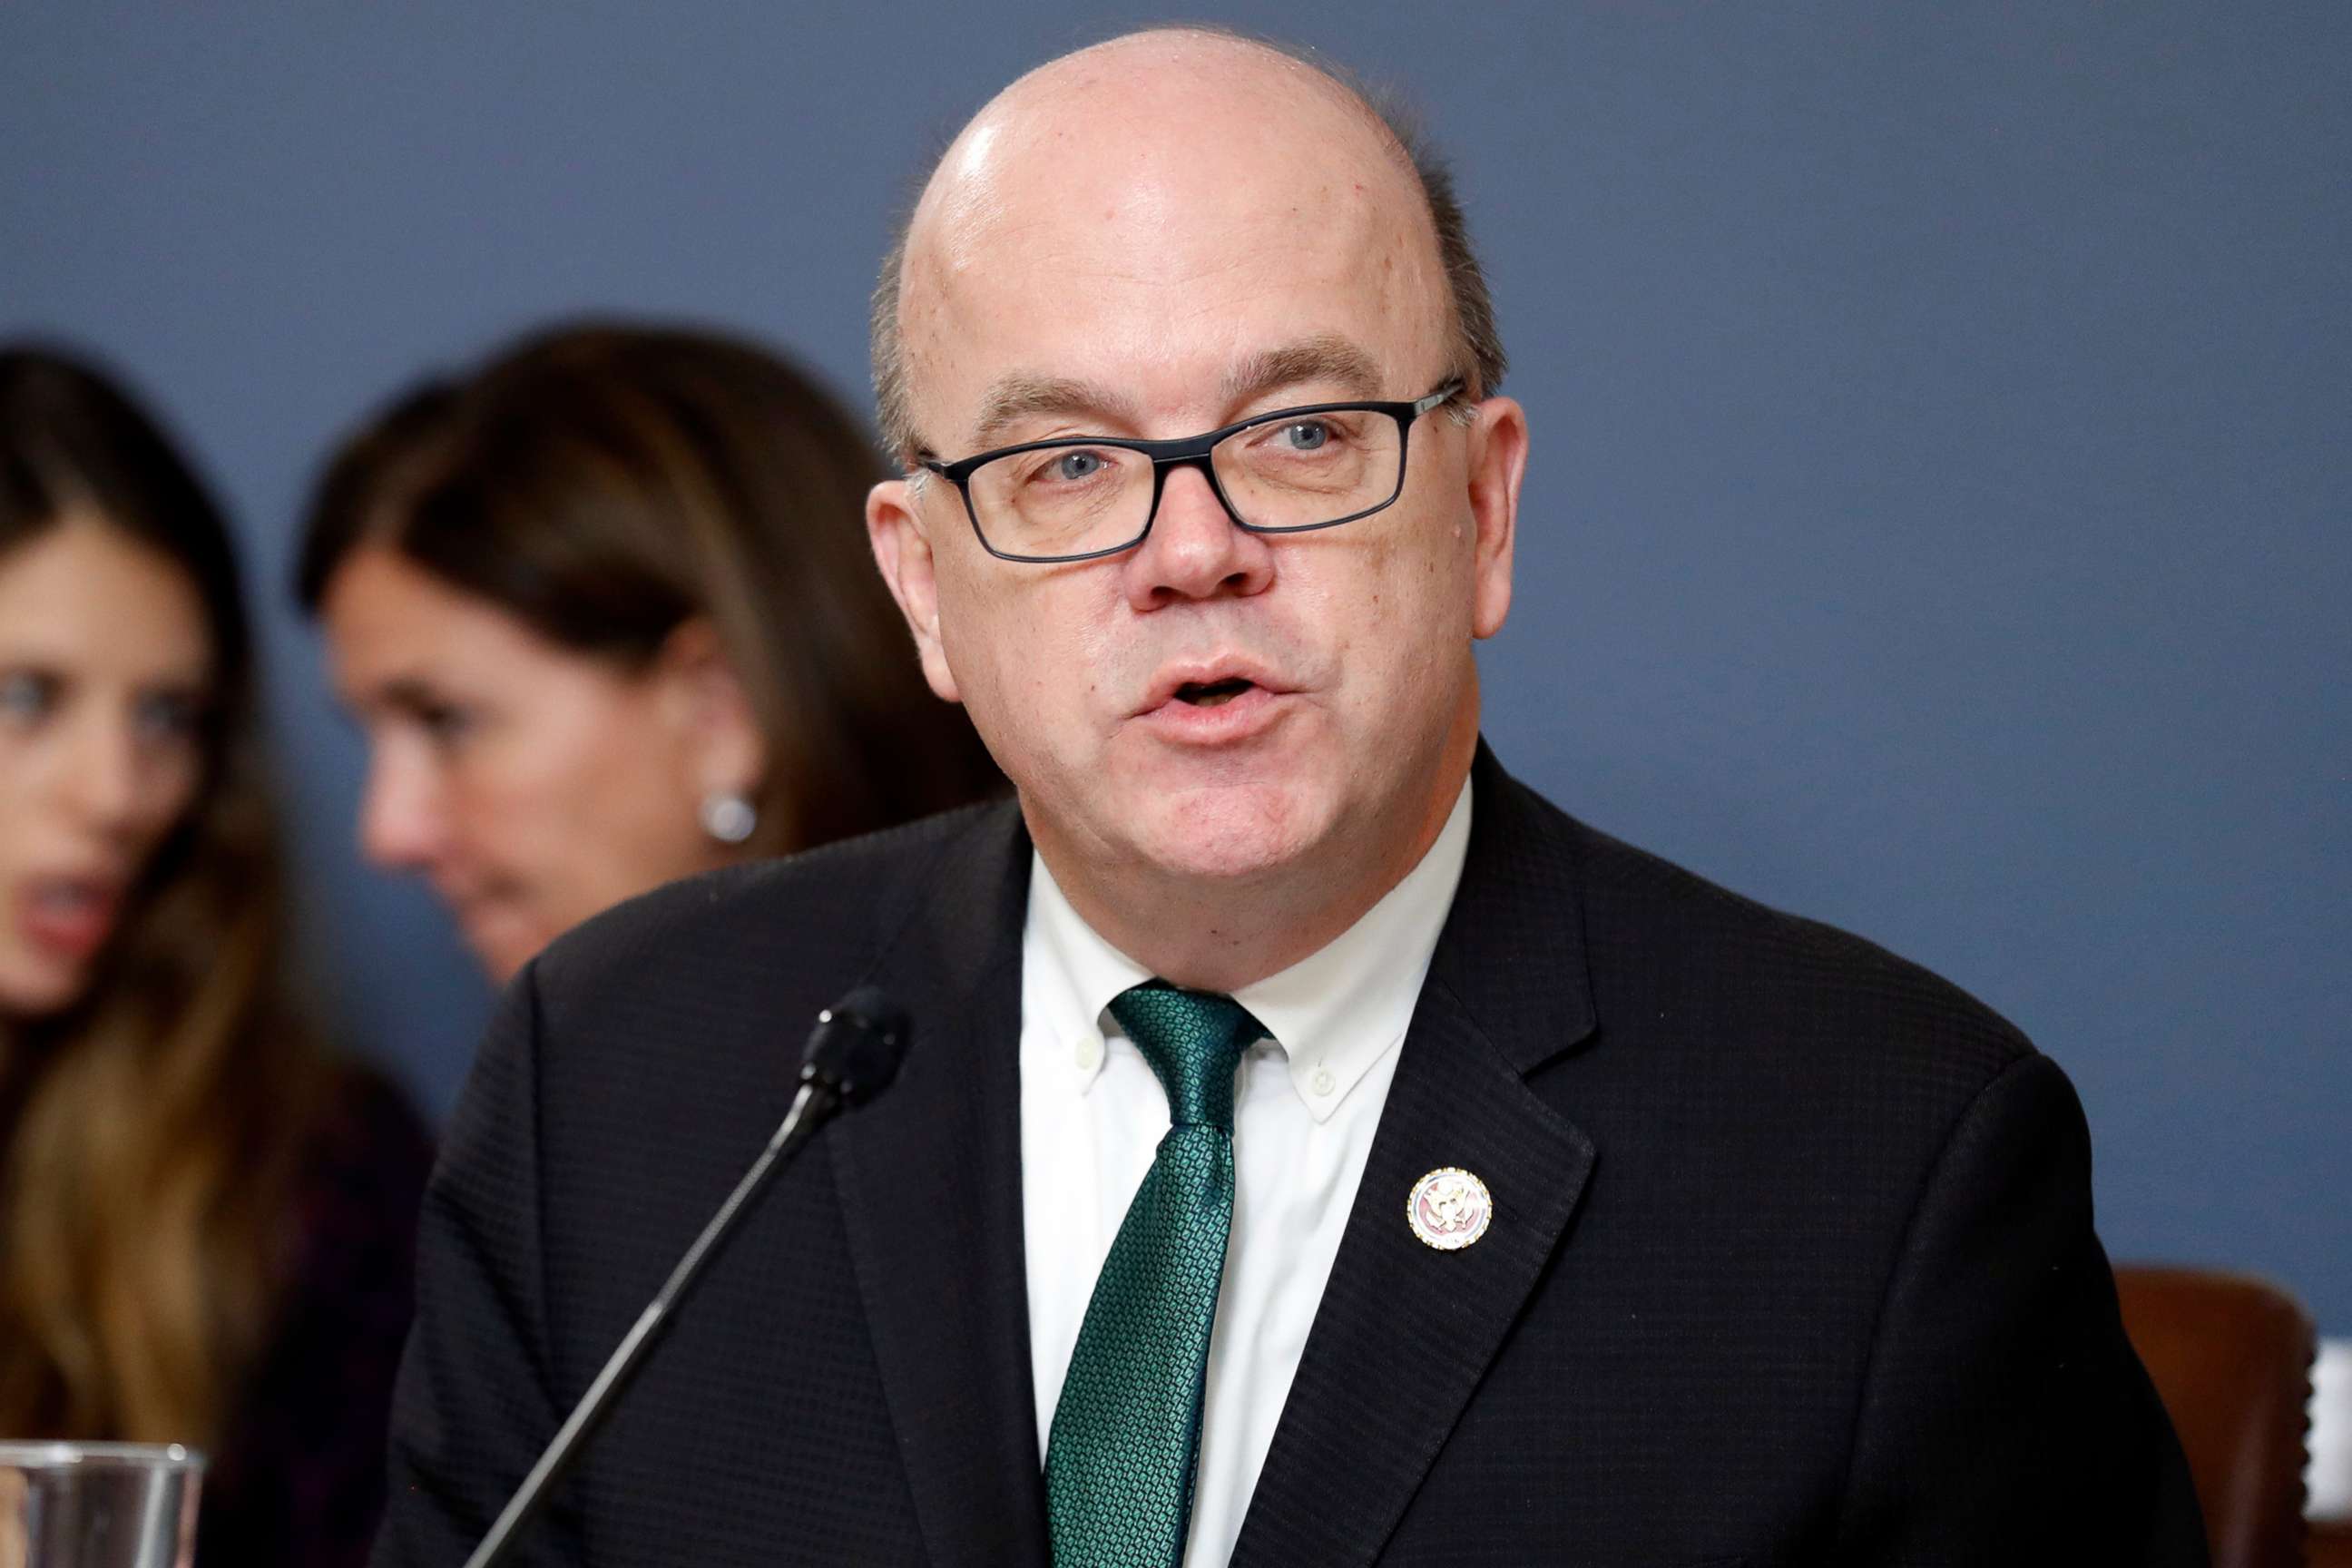 PHOTO: House Rules Committee chairman Rep. Jim McGovern, D-Mass., speaks during a House Rules Committee hearing on the impeachment against President Donald Trump, Dec. 17, 2019, on Capitol Hill.